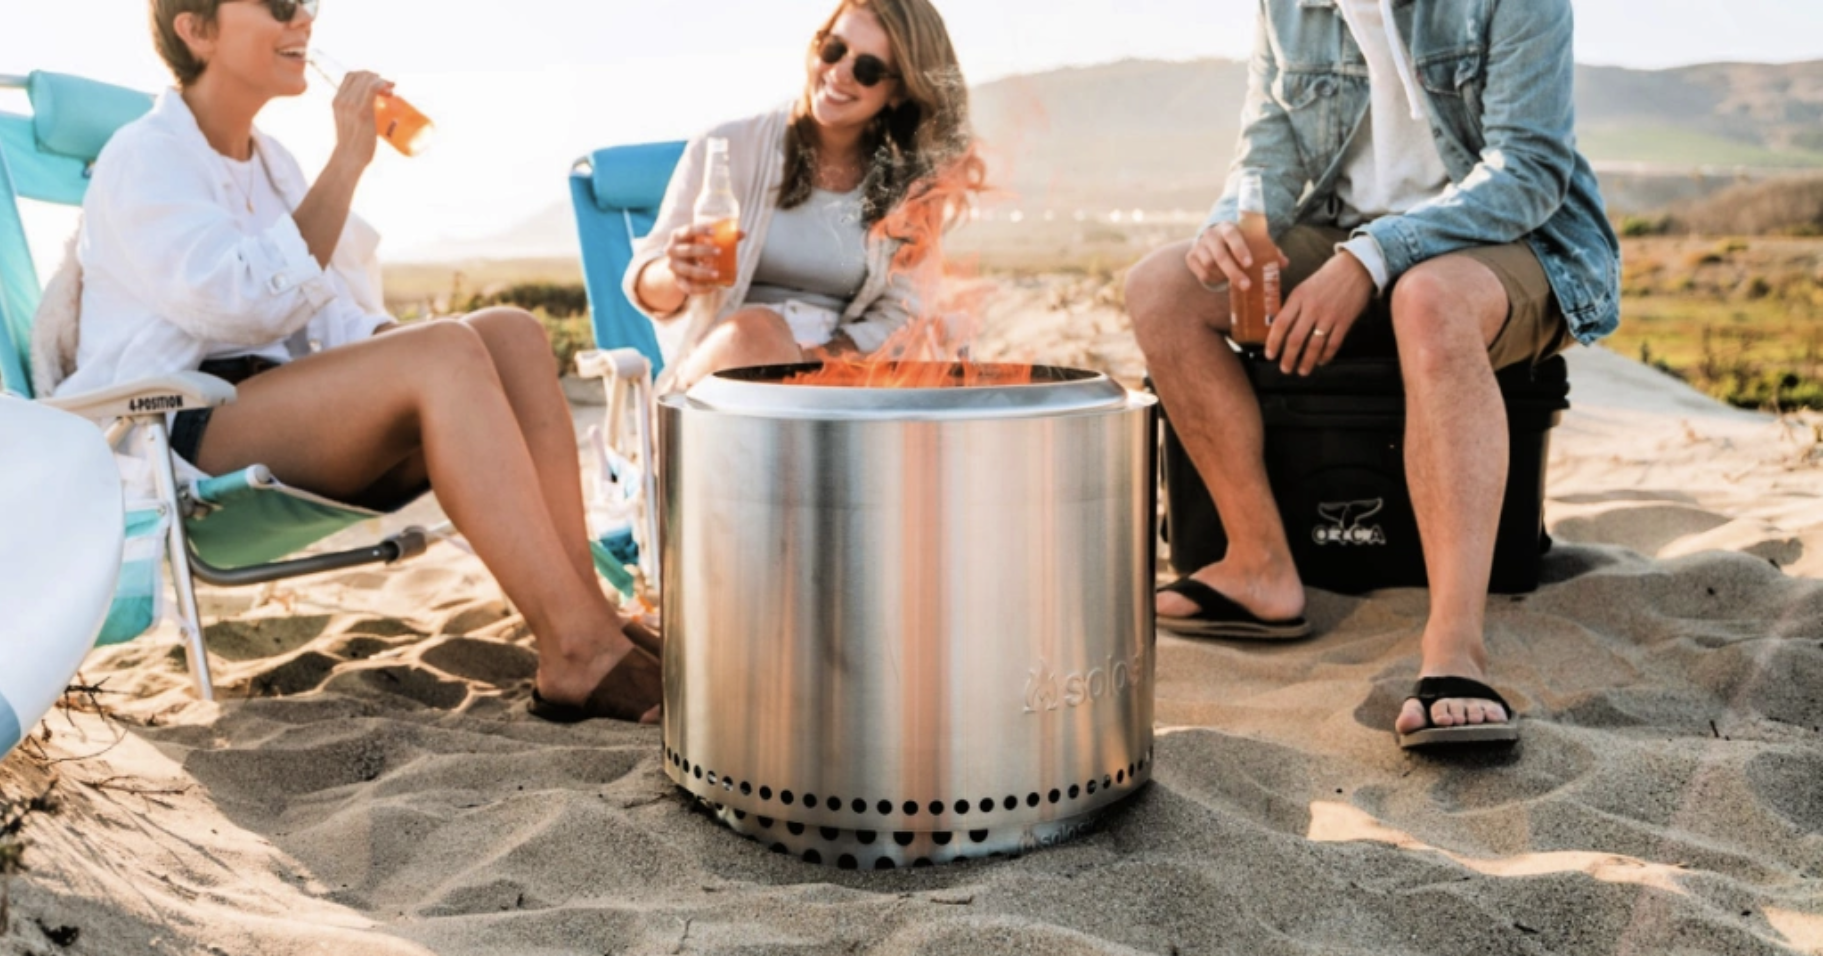 45% Off Solo Stove Fire Pits + Free Shipping | Great Father’s Day Gift Ideas!